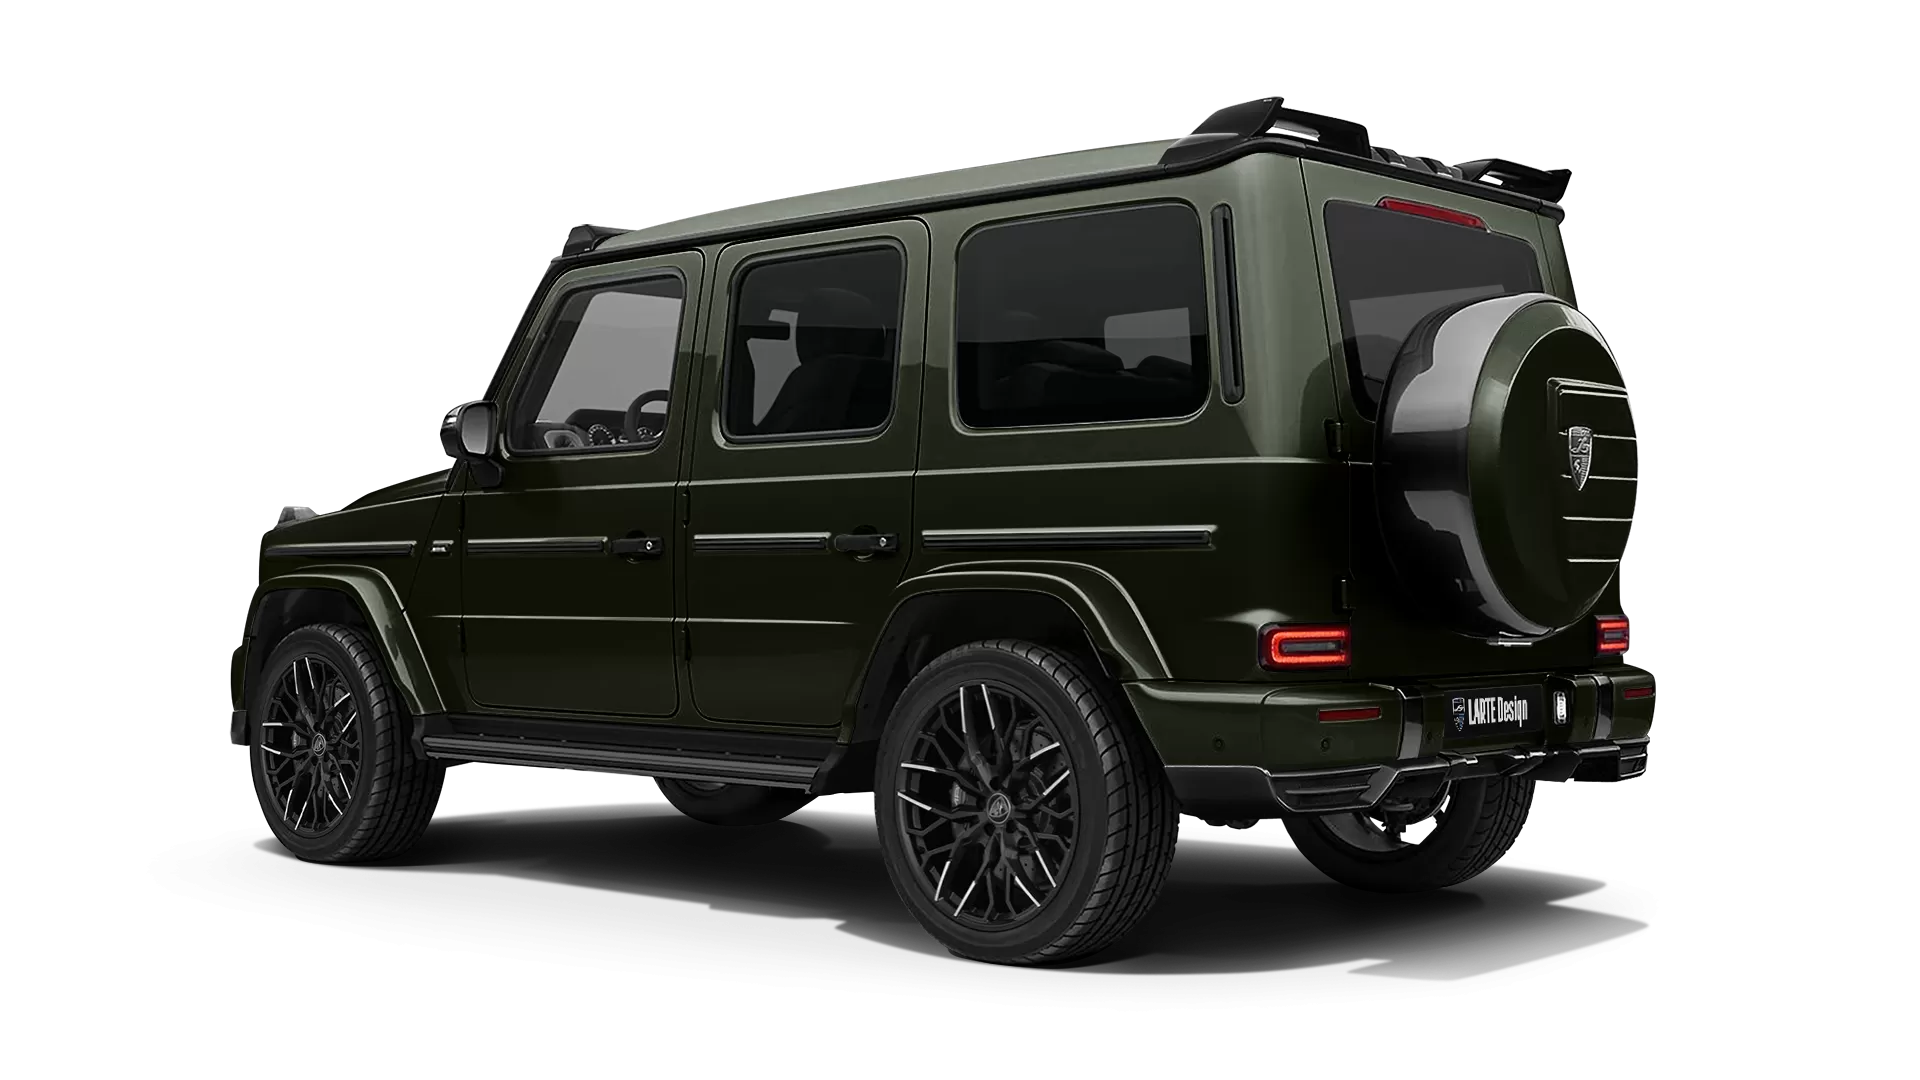 Mercedes G class W463 with painted body kit: rear view shown in Dark Olive